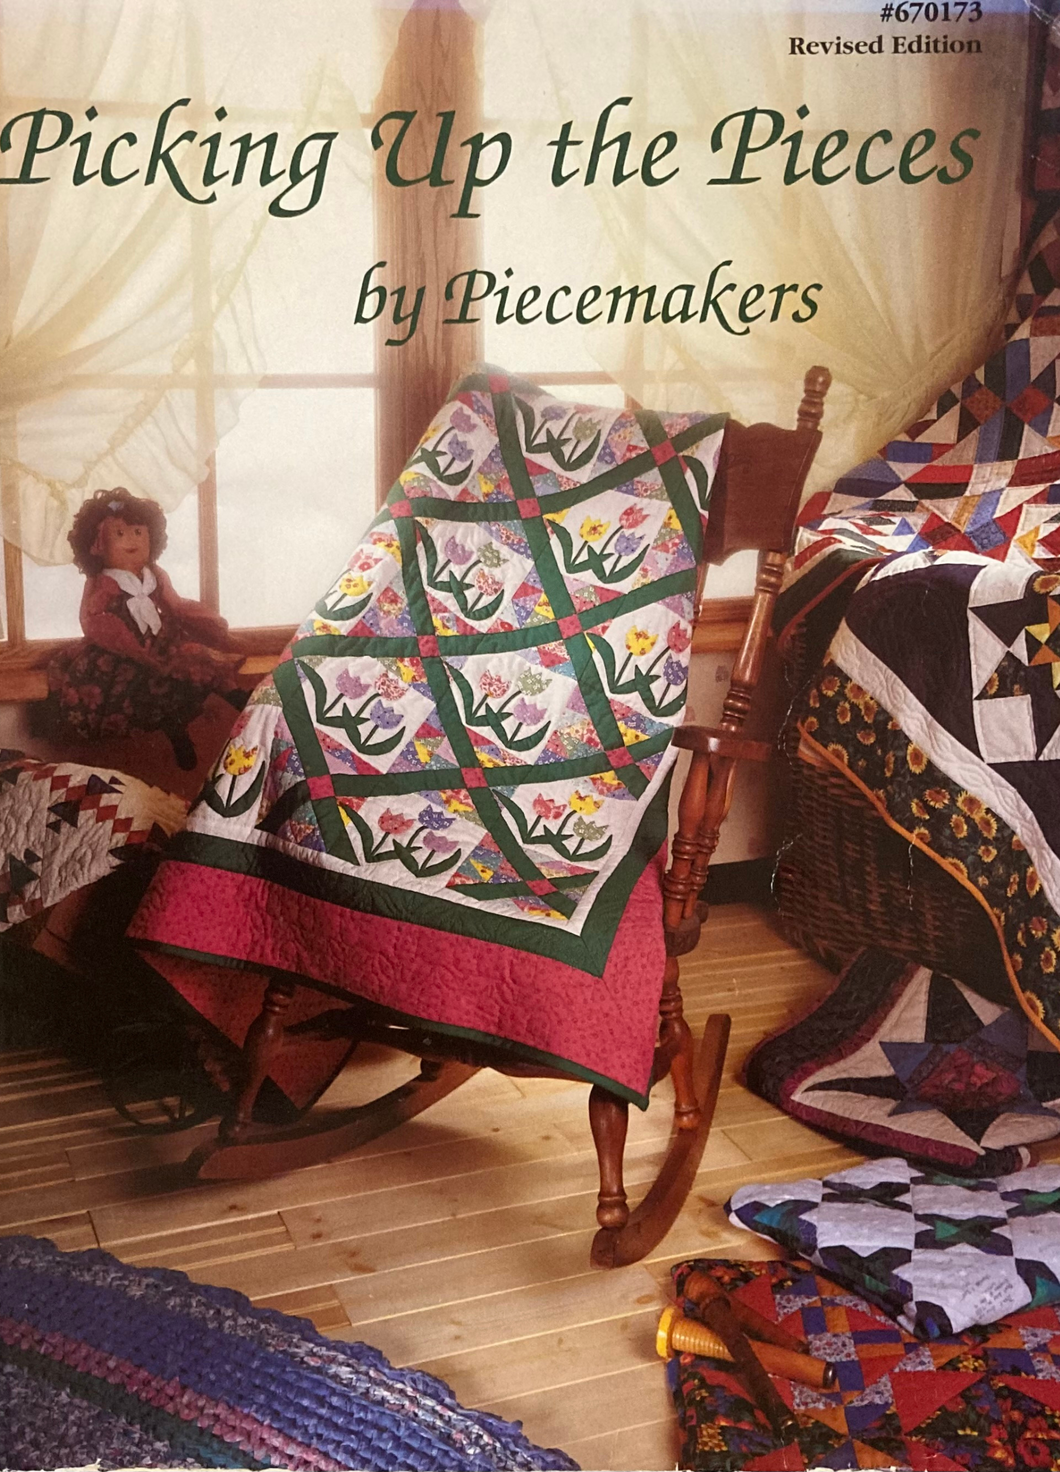 Picking Up the Pieces by Piecemakers